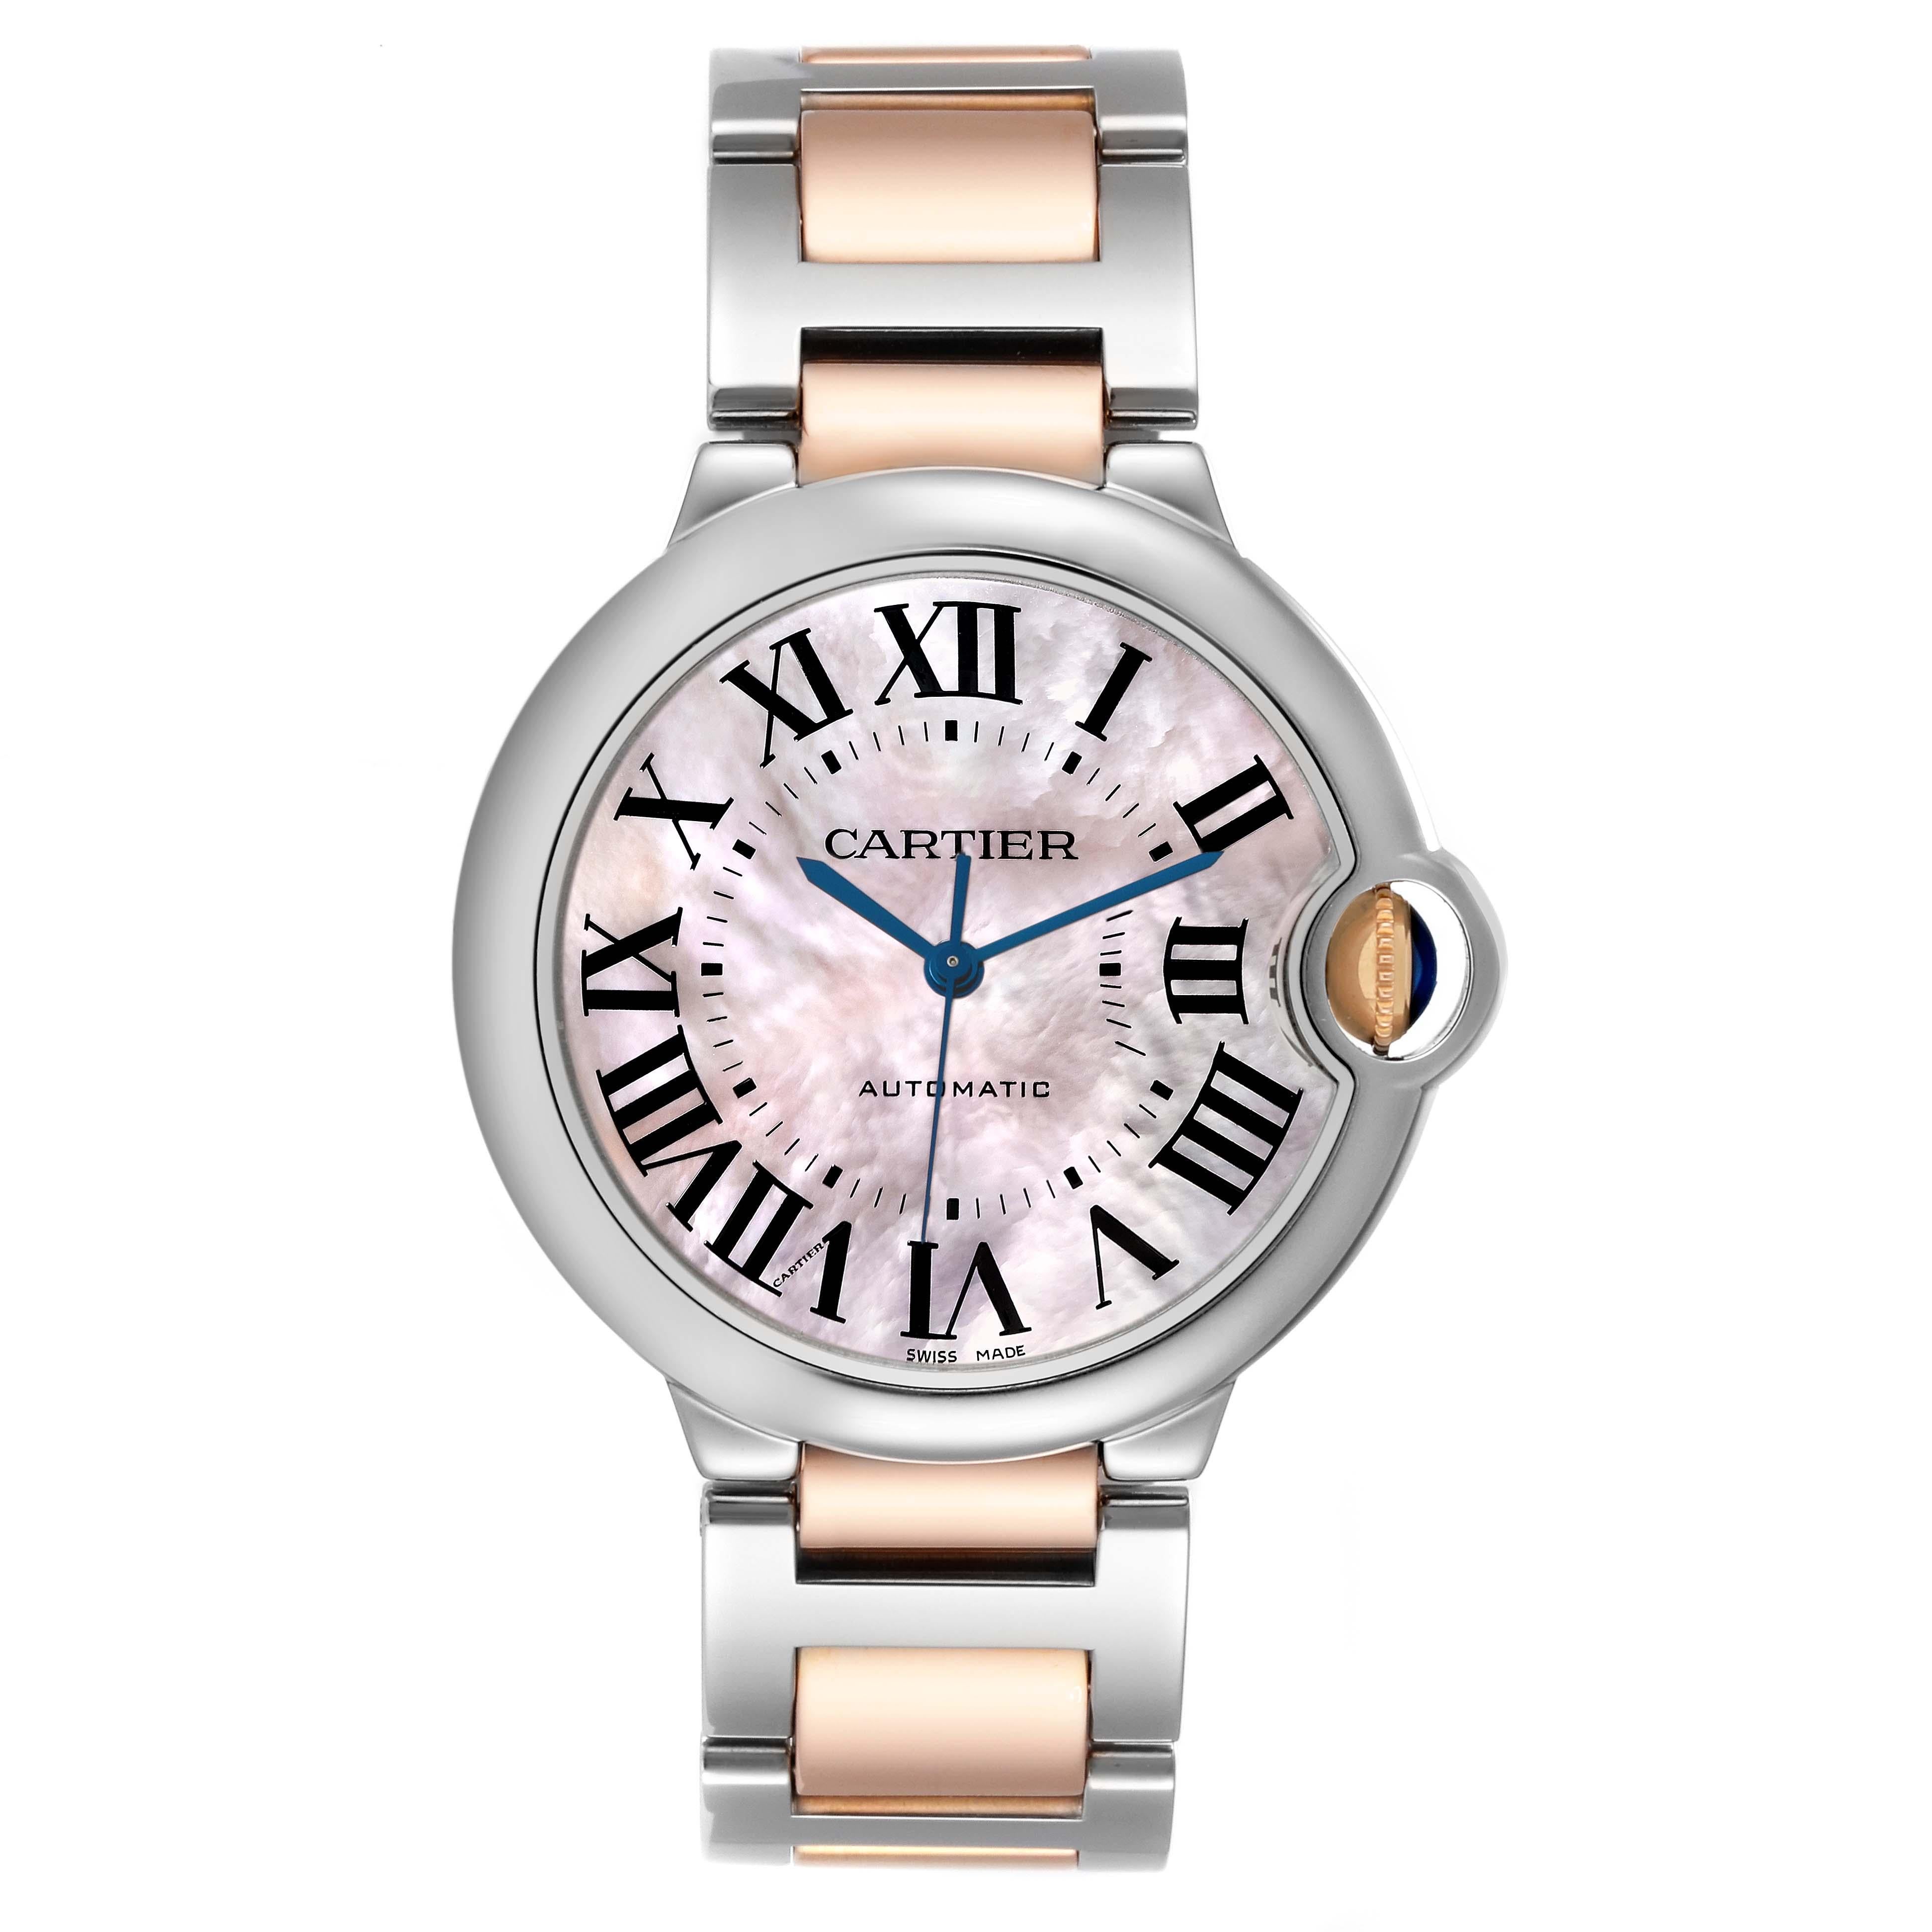 Cartier Ballon Bleu Steel Rose Gold Mother of Pearl Ladies Watch W6920033 Papers. Automatic self-winding movement. Round stainless steel case 36 mm in diameter. Fluted 18K rose gold crown set with a blue spinel cabochon. Stainless steel smooth